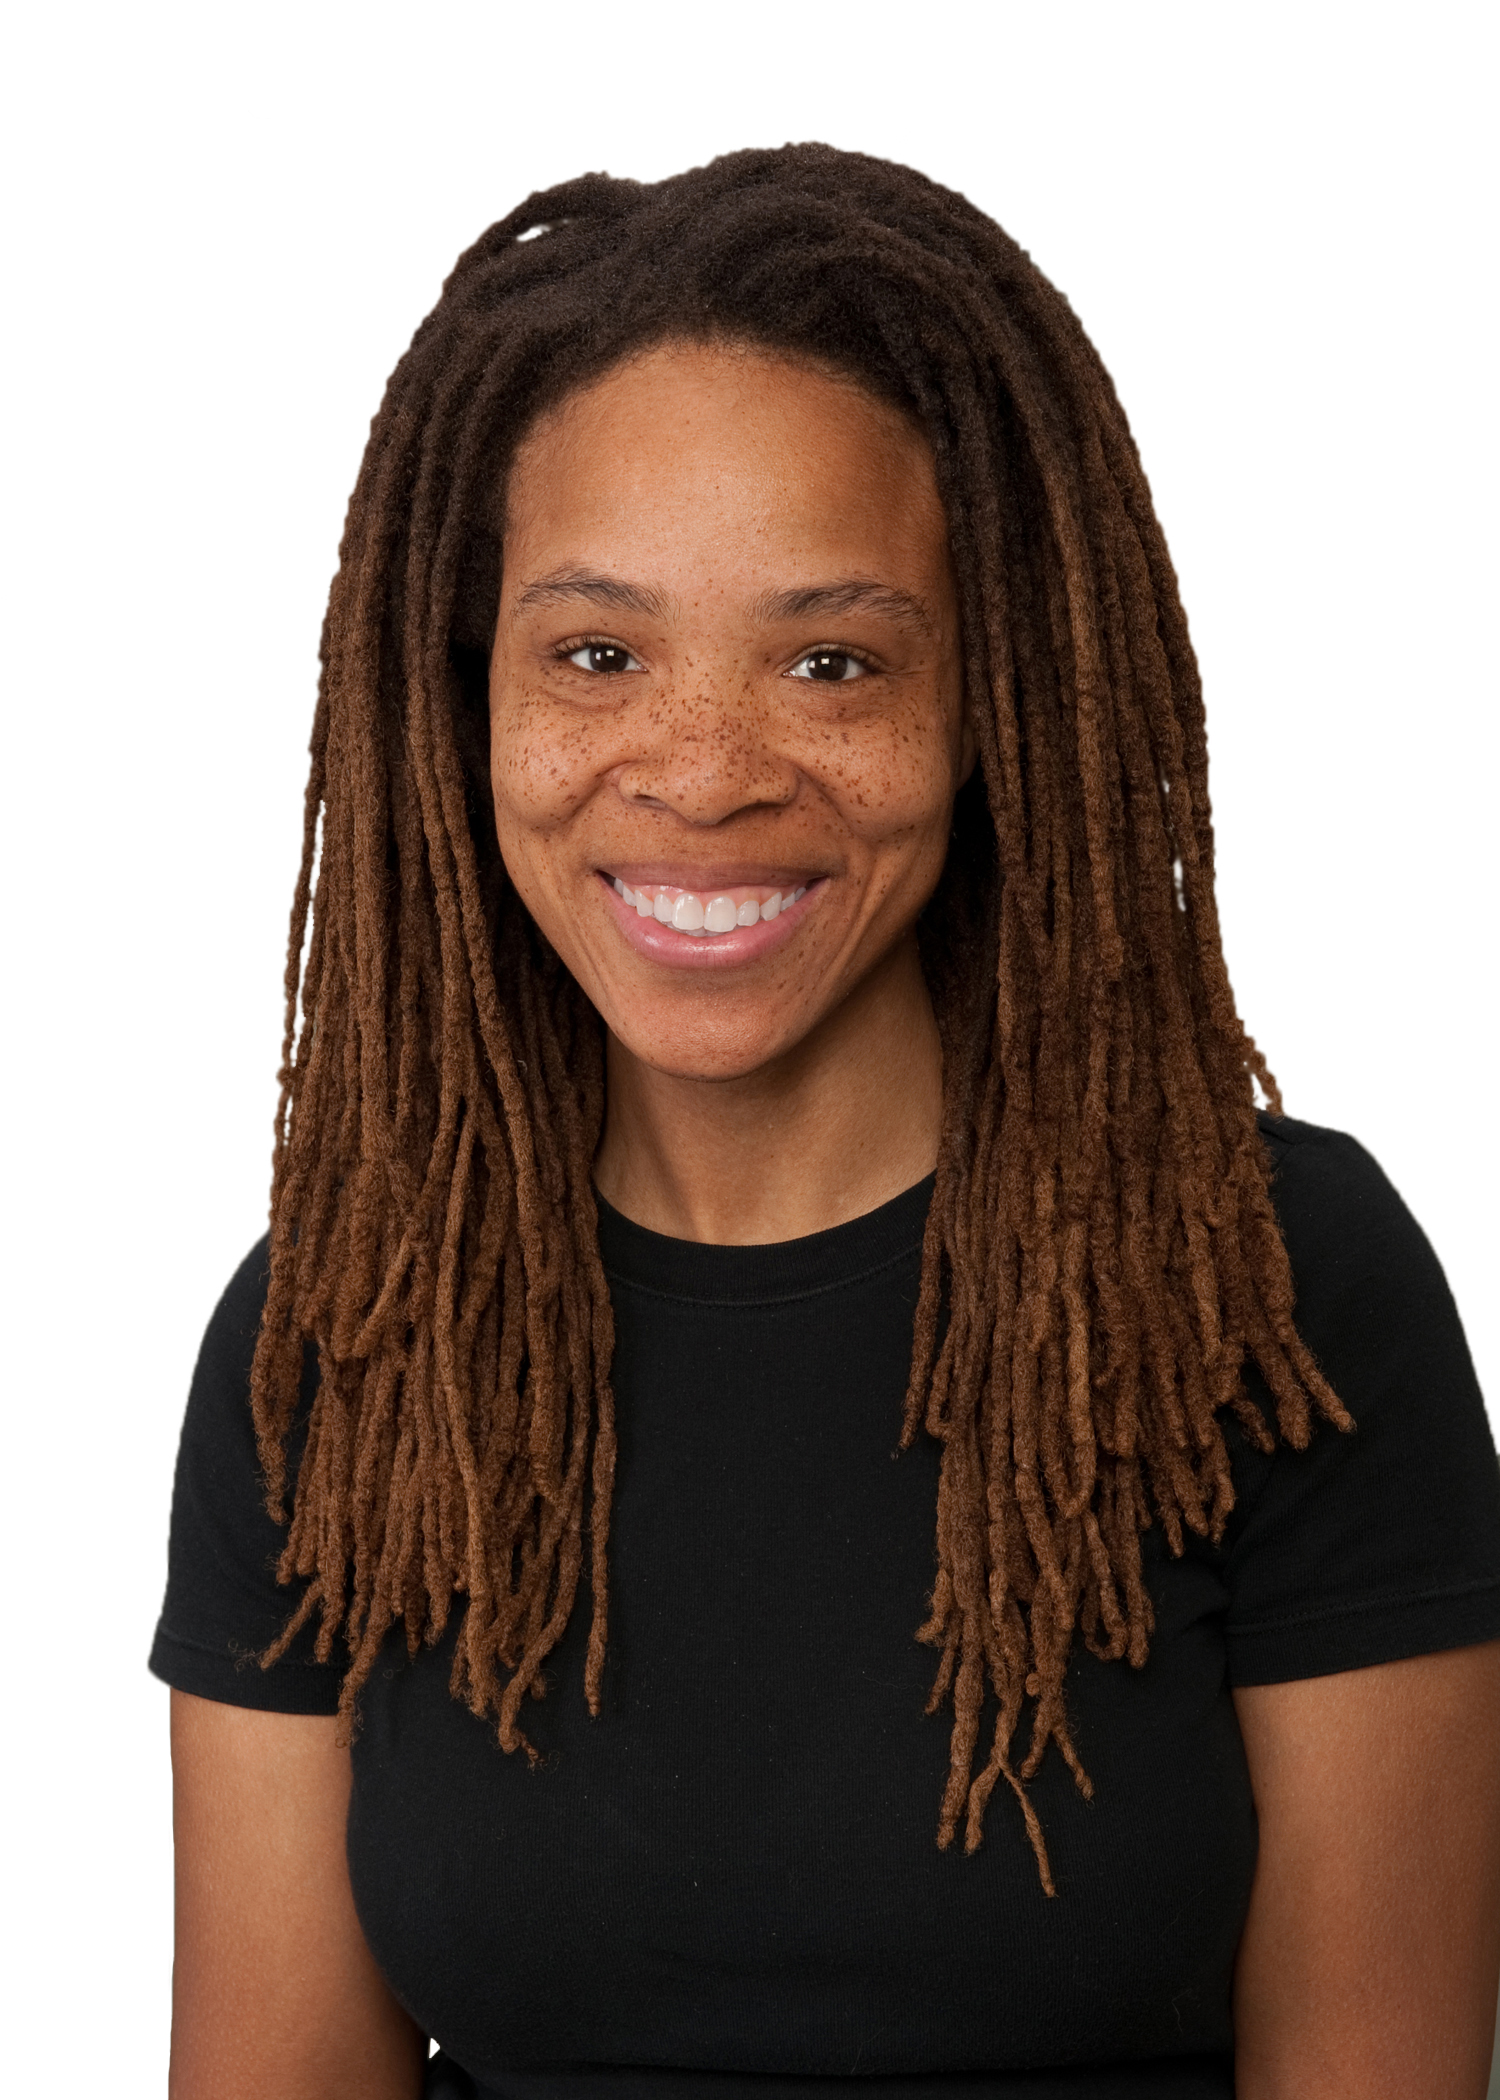 Ronke Olabisi was recently selected to take part in the National Academy of Engineering’s (NAE) 26th annual U.S. Frontiers of Engineering symposium. 